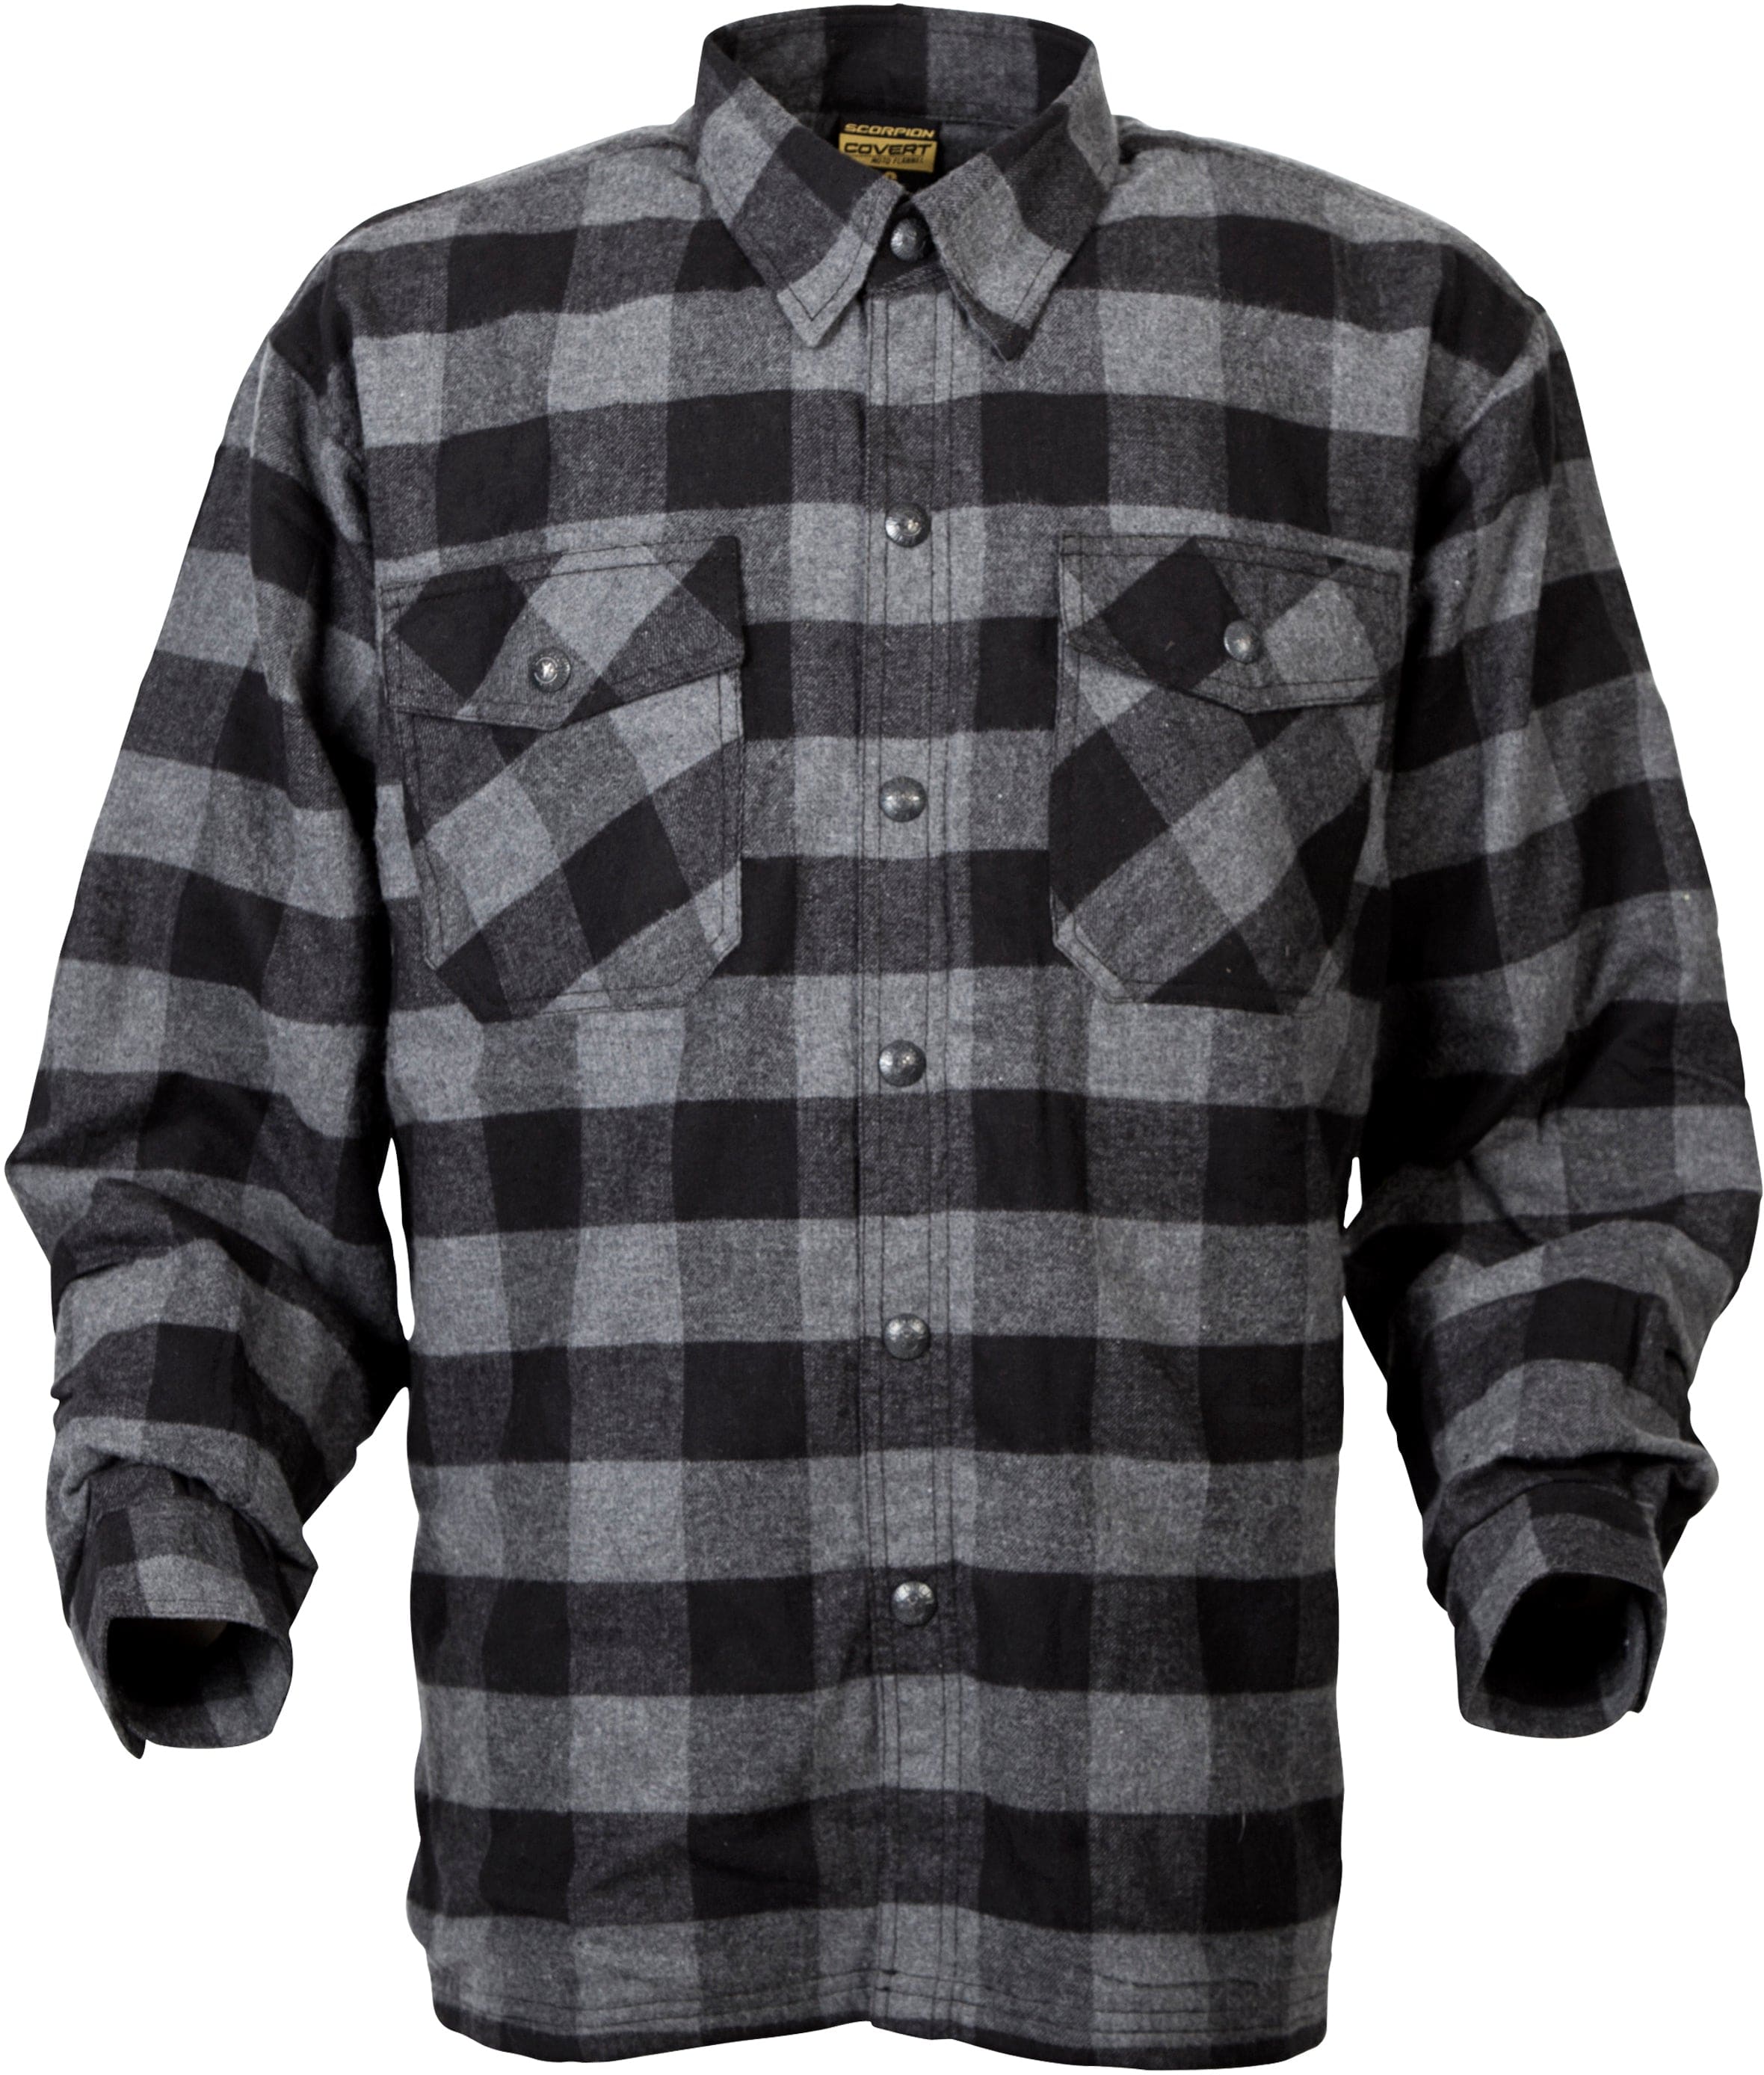 Western Powersports Flannel Shirt Black/Grey / 2X-Large Covert Moto Flannel by Scorpion Exo 13403-7